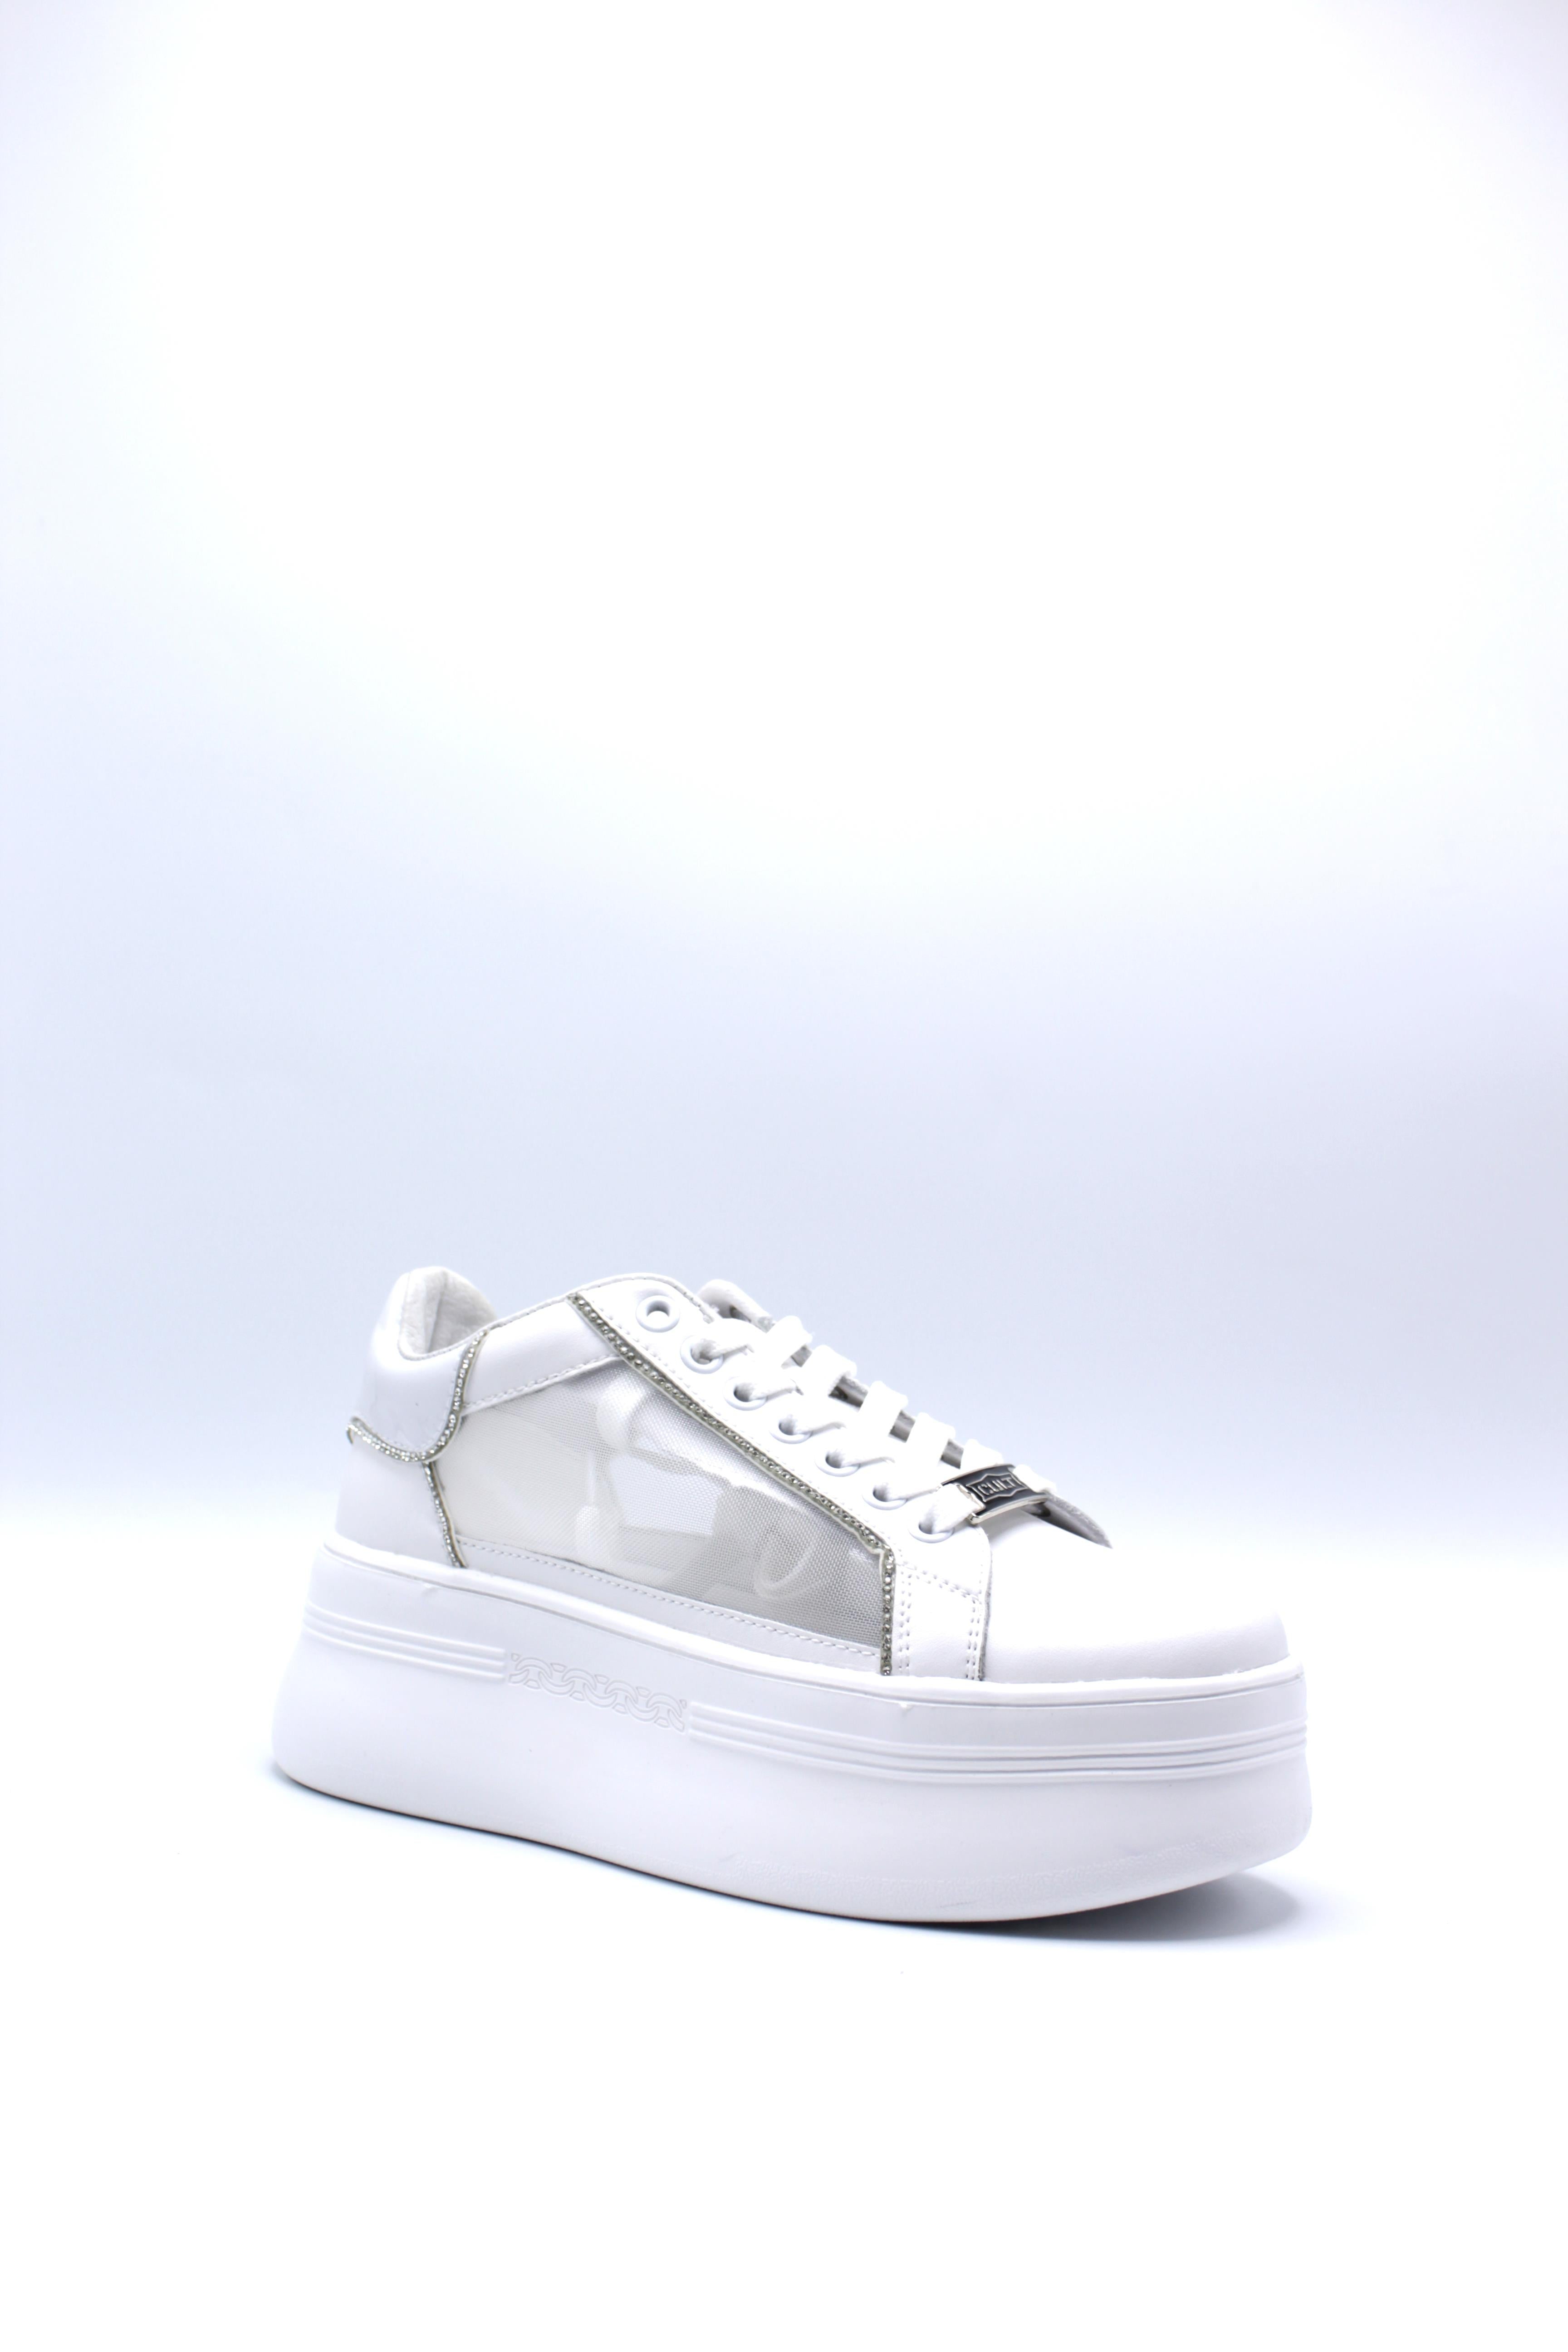 CULT Sneakers Donna - Bianco modello CLW422801